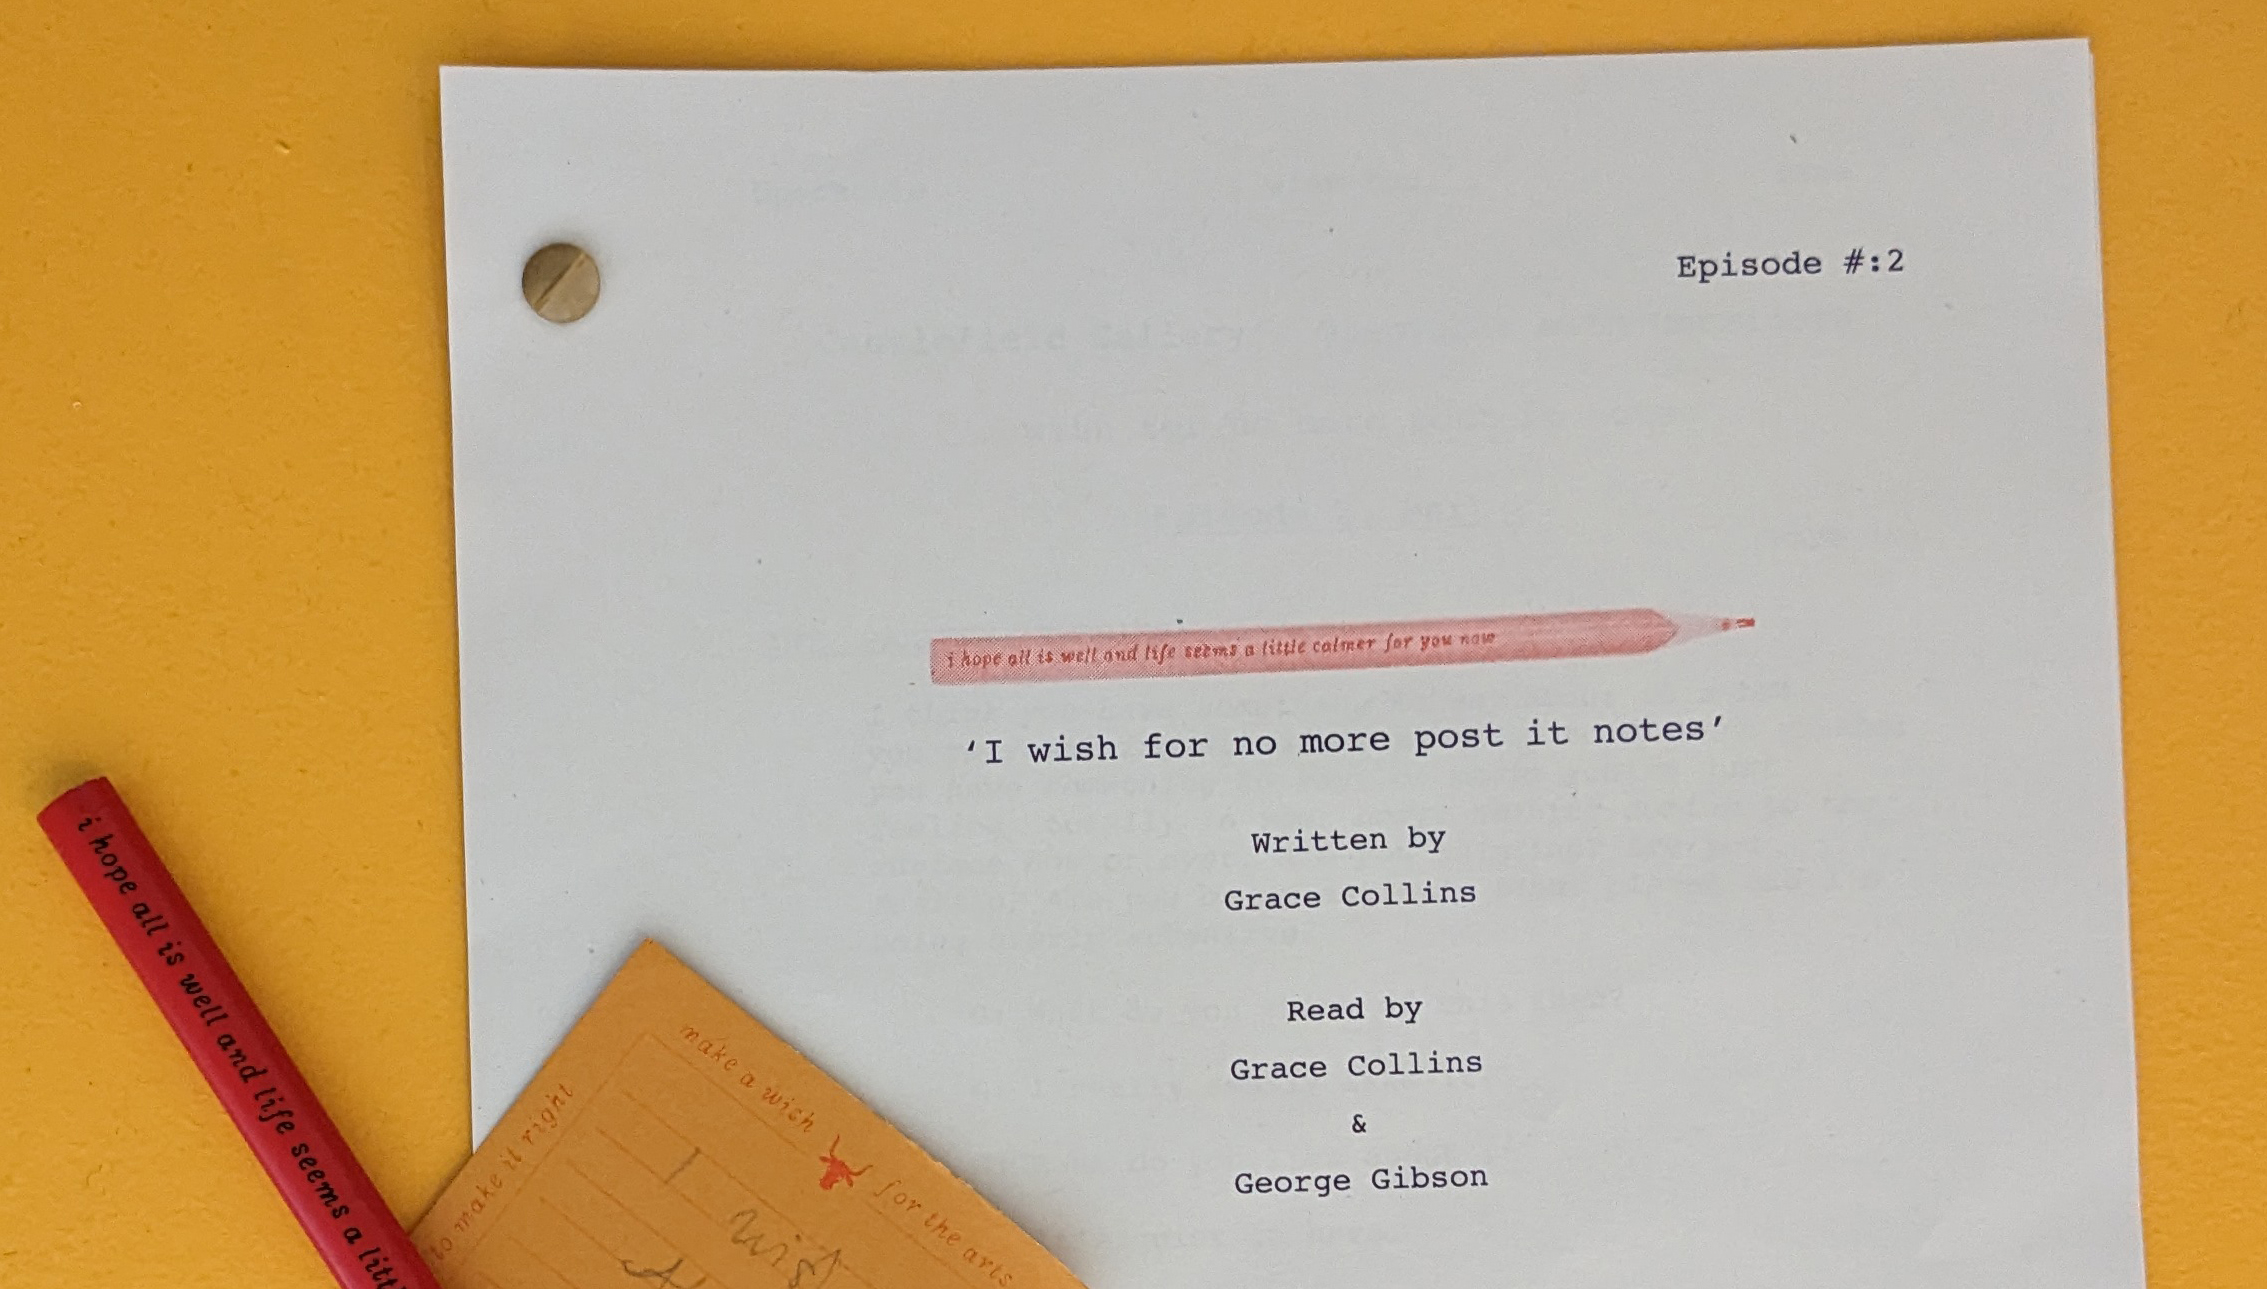 A white typed page on a deep yellow background; the edge of an orange notebook and red strip of paper visible at the bottom left.